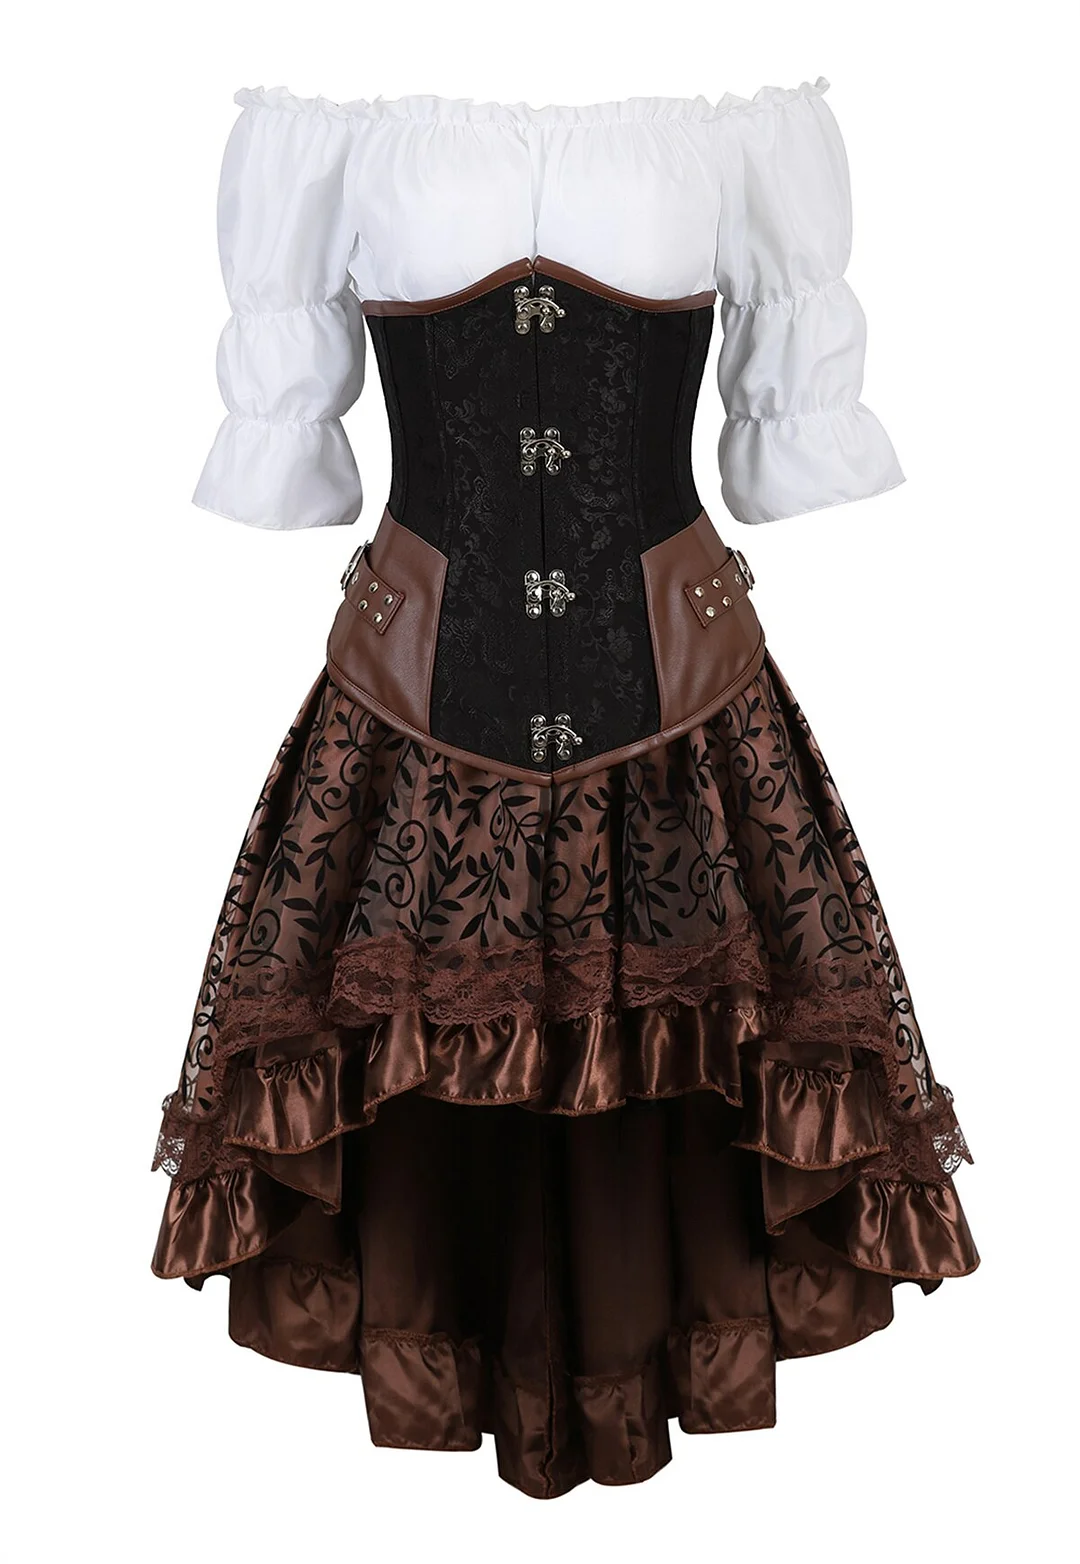 Uaang Corset Dress Brown Pirate Costume Woman Skirt Plus Size Gothic Underbust Corset With Skirt Three Piece Set